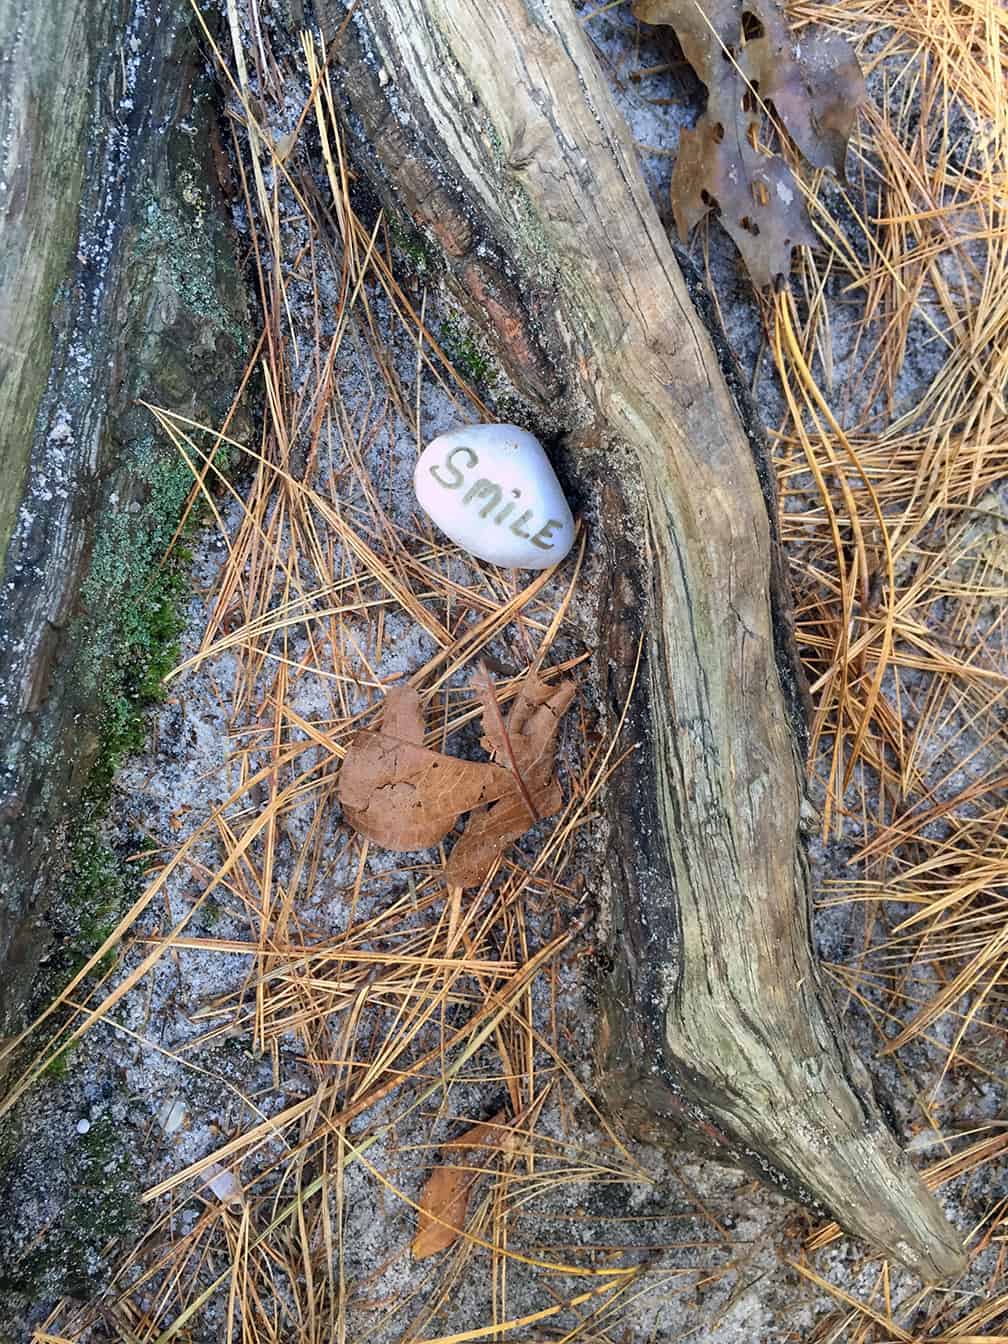 This is the first stone I came across in a woodland.